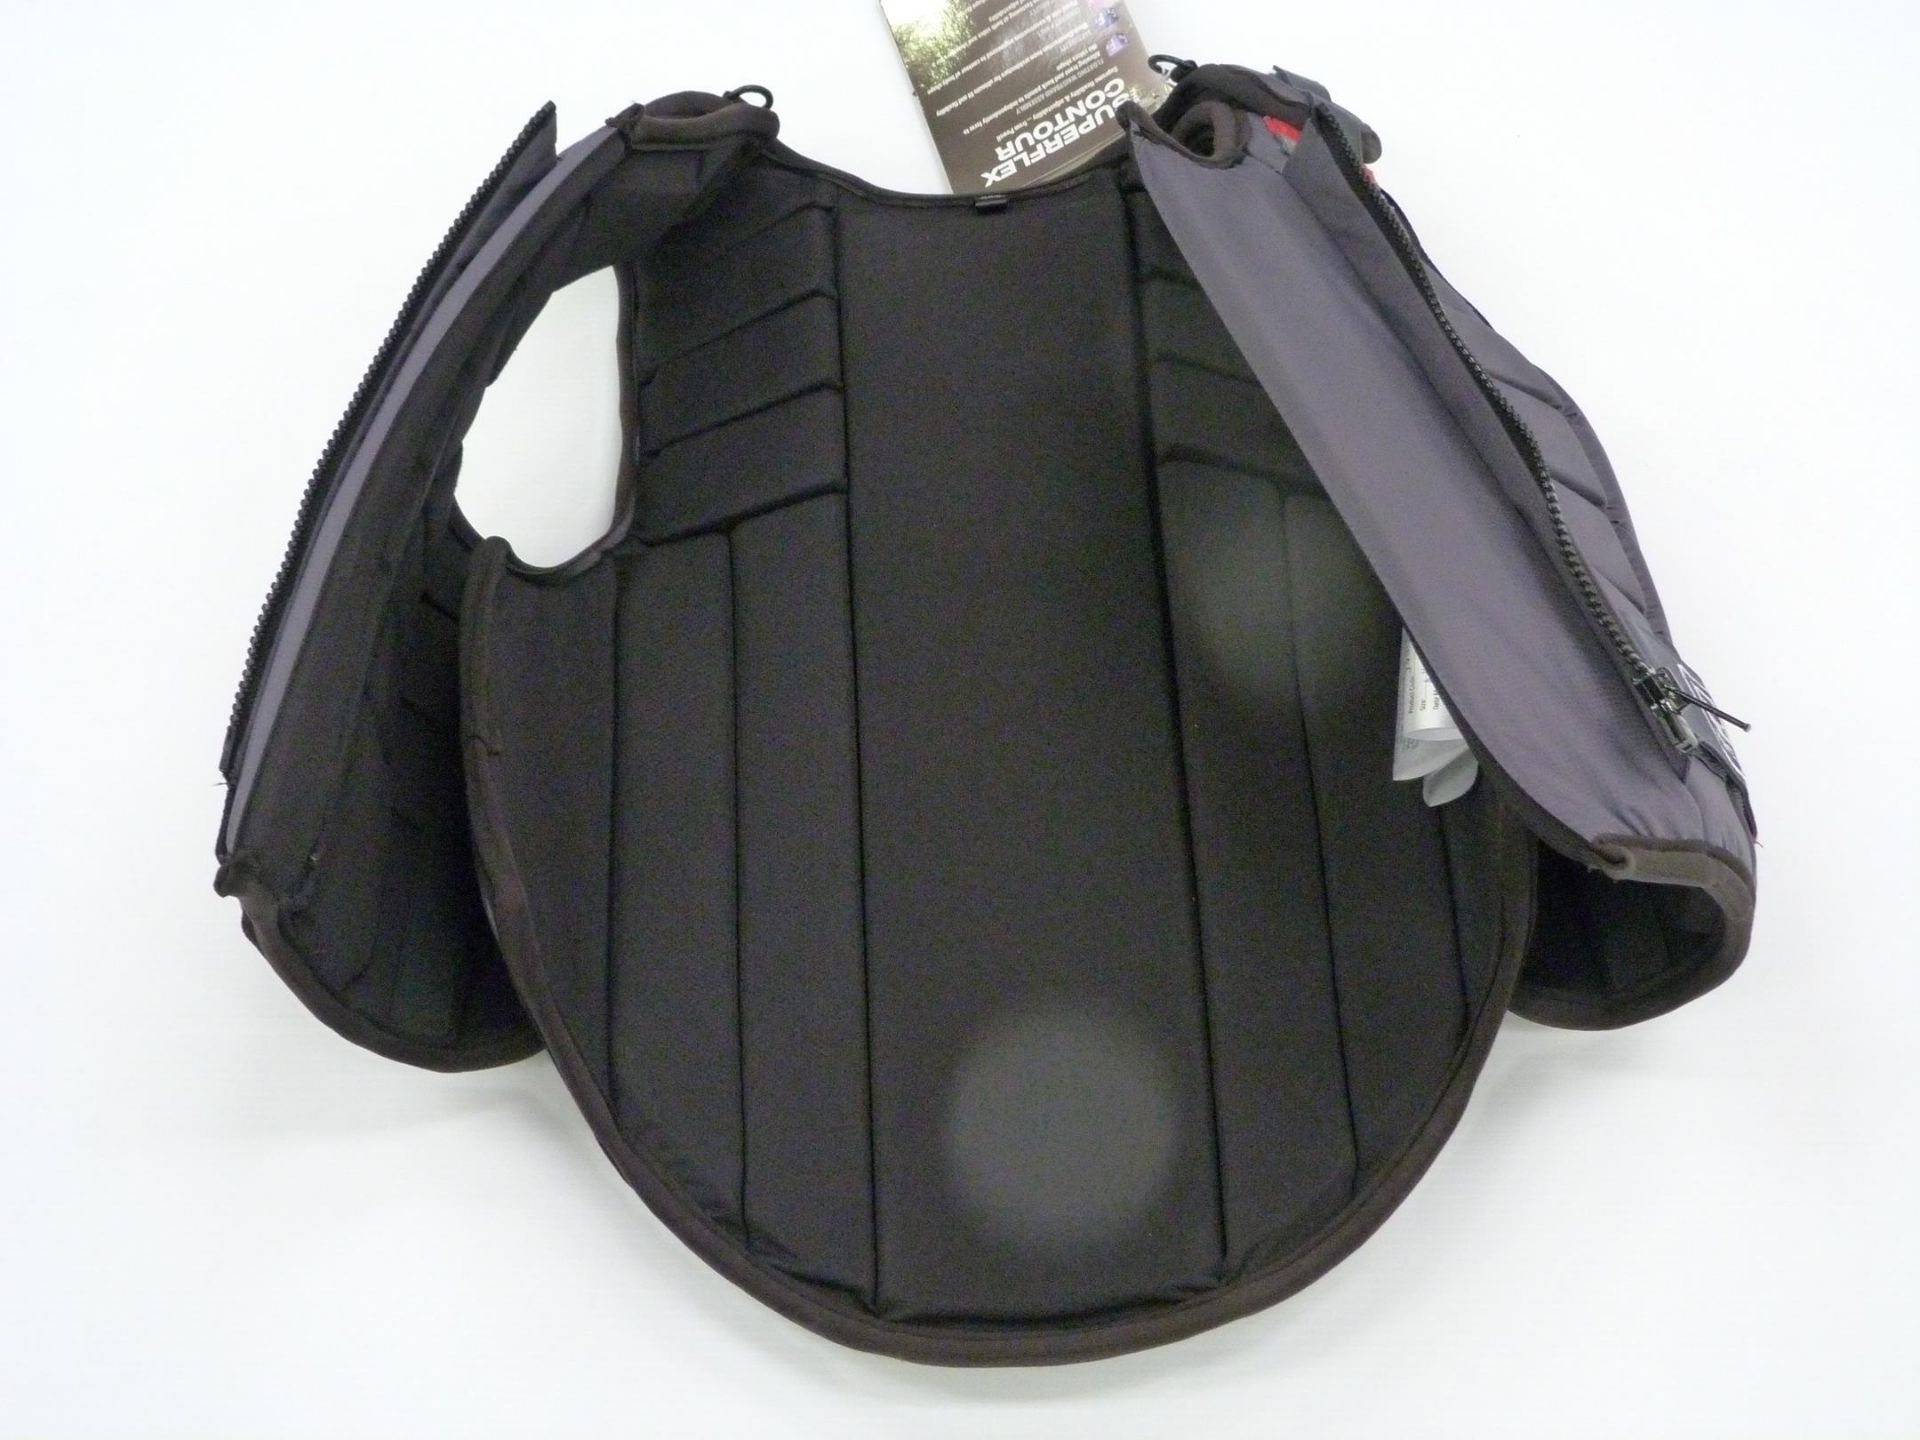 * A New Horse Rider Body and Shoulder Protector Level 3 Made by Powell-Superflex Contour. Adult X- - Image 2 of 3